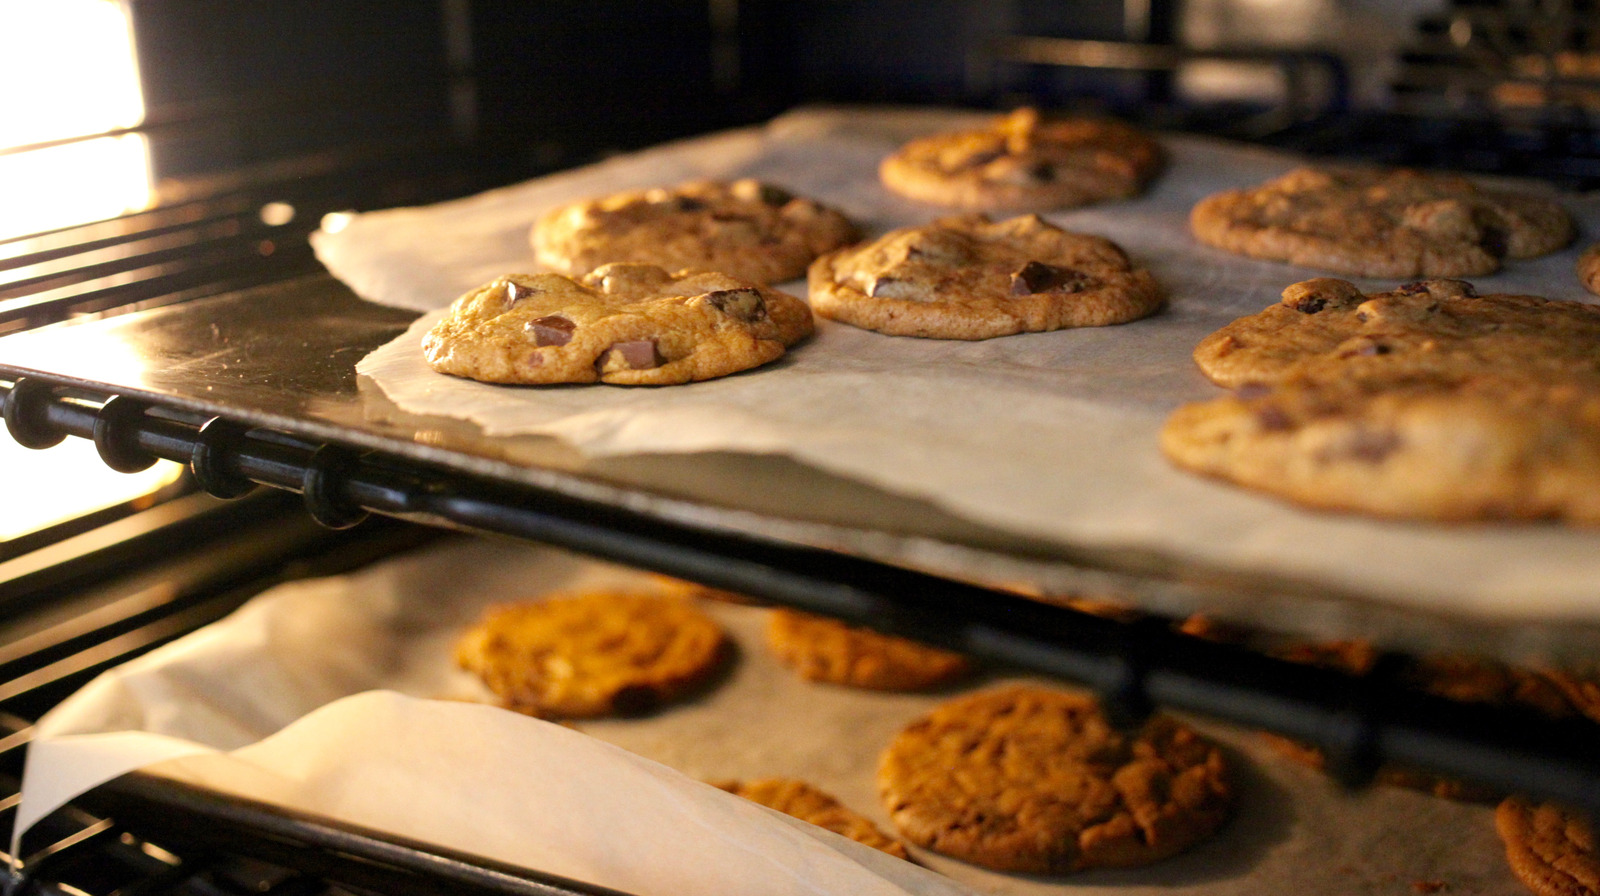 Cookie Sheets vs. Baking Sheets—and When To Use Each One